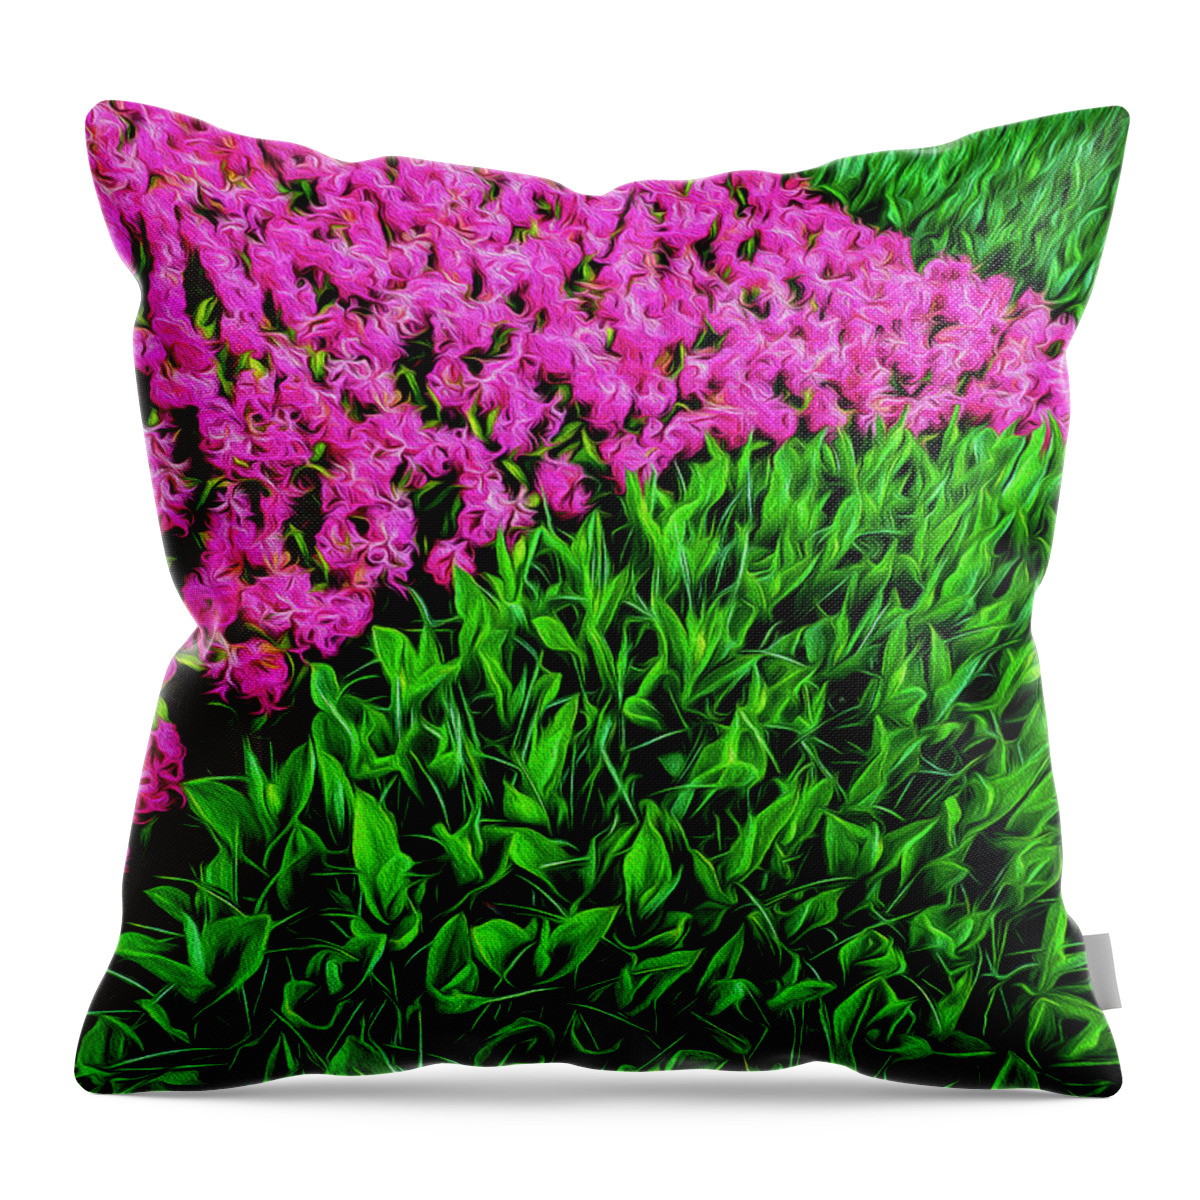 Tulips Throw Pillow featuring the photograph In The Pink by Paul Wear